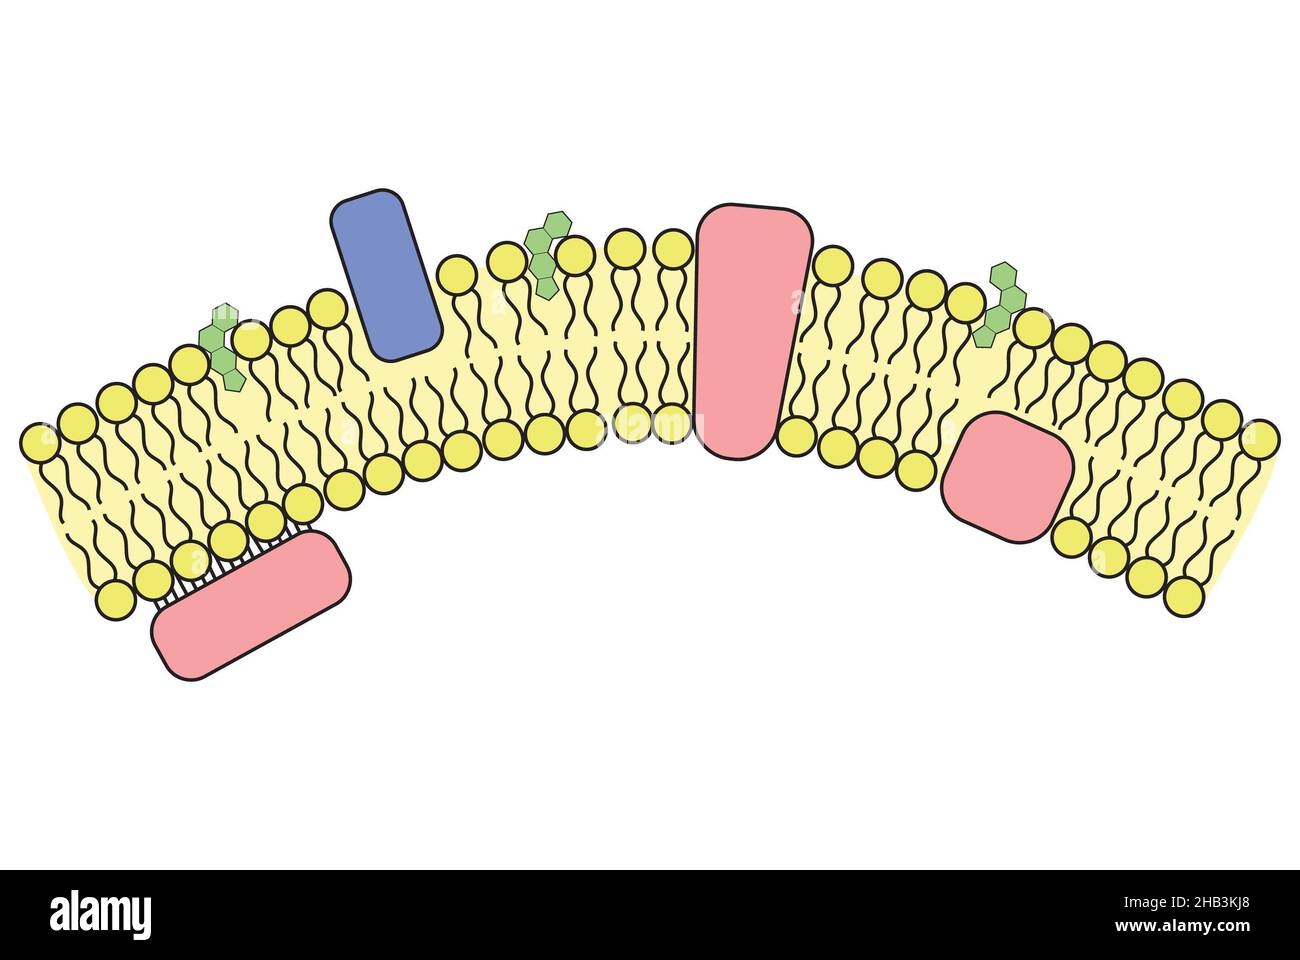 Simple illustration of cell membrane and incorporated structures Stock Photo